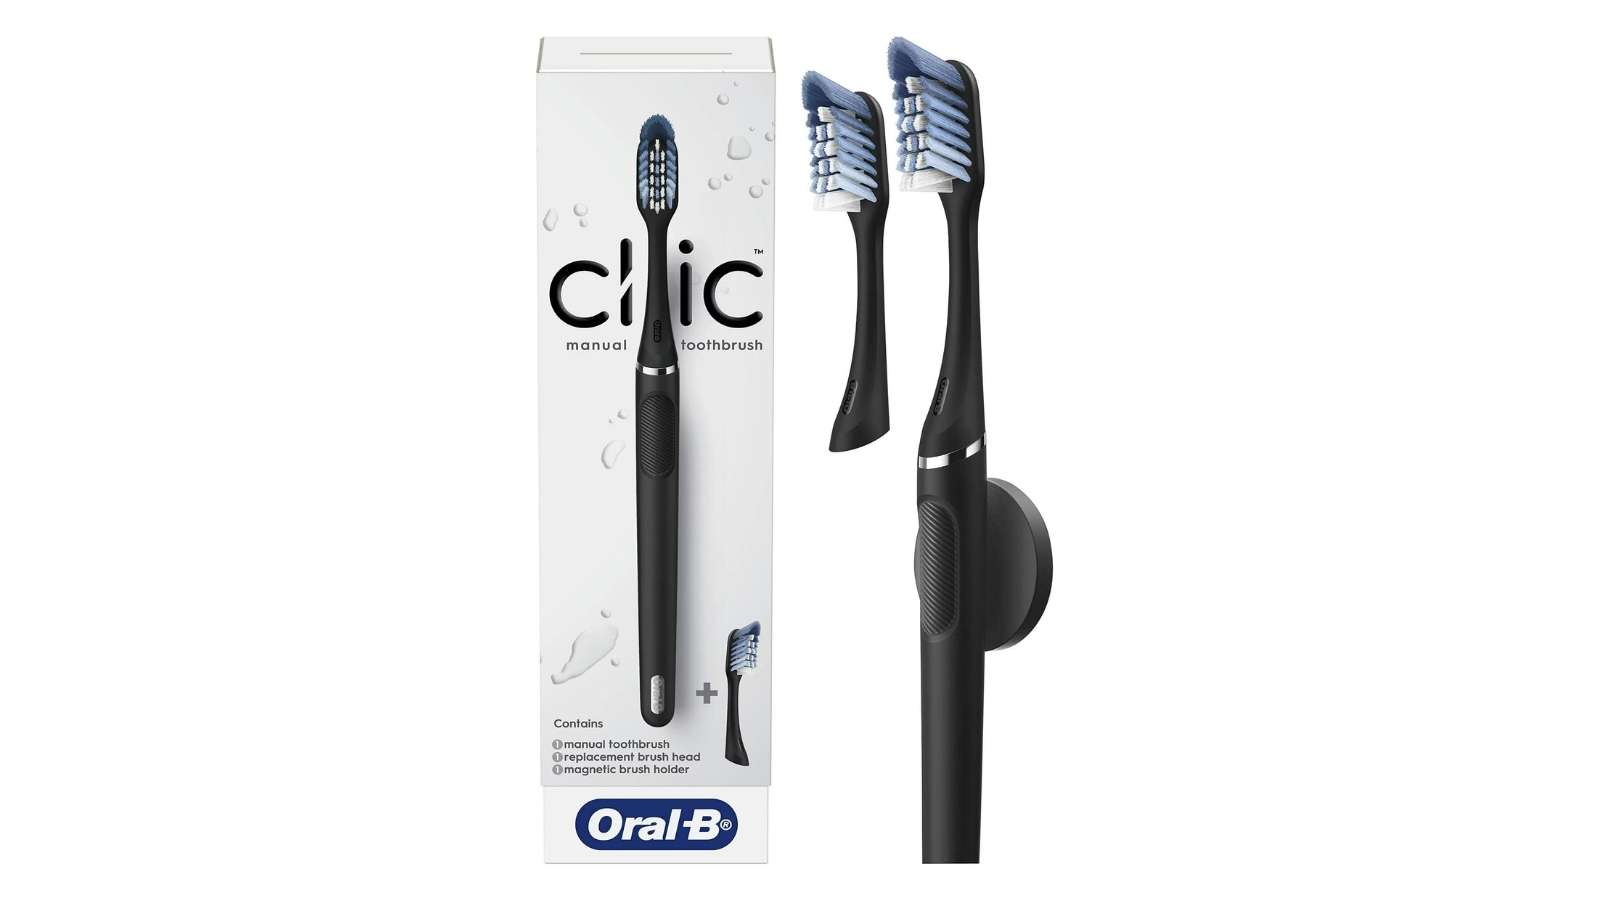 Reviews of best manual toothbrushes - display of oral-b clic manual toothbrush